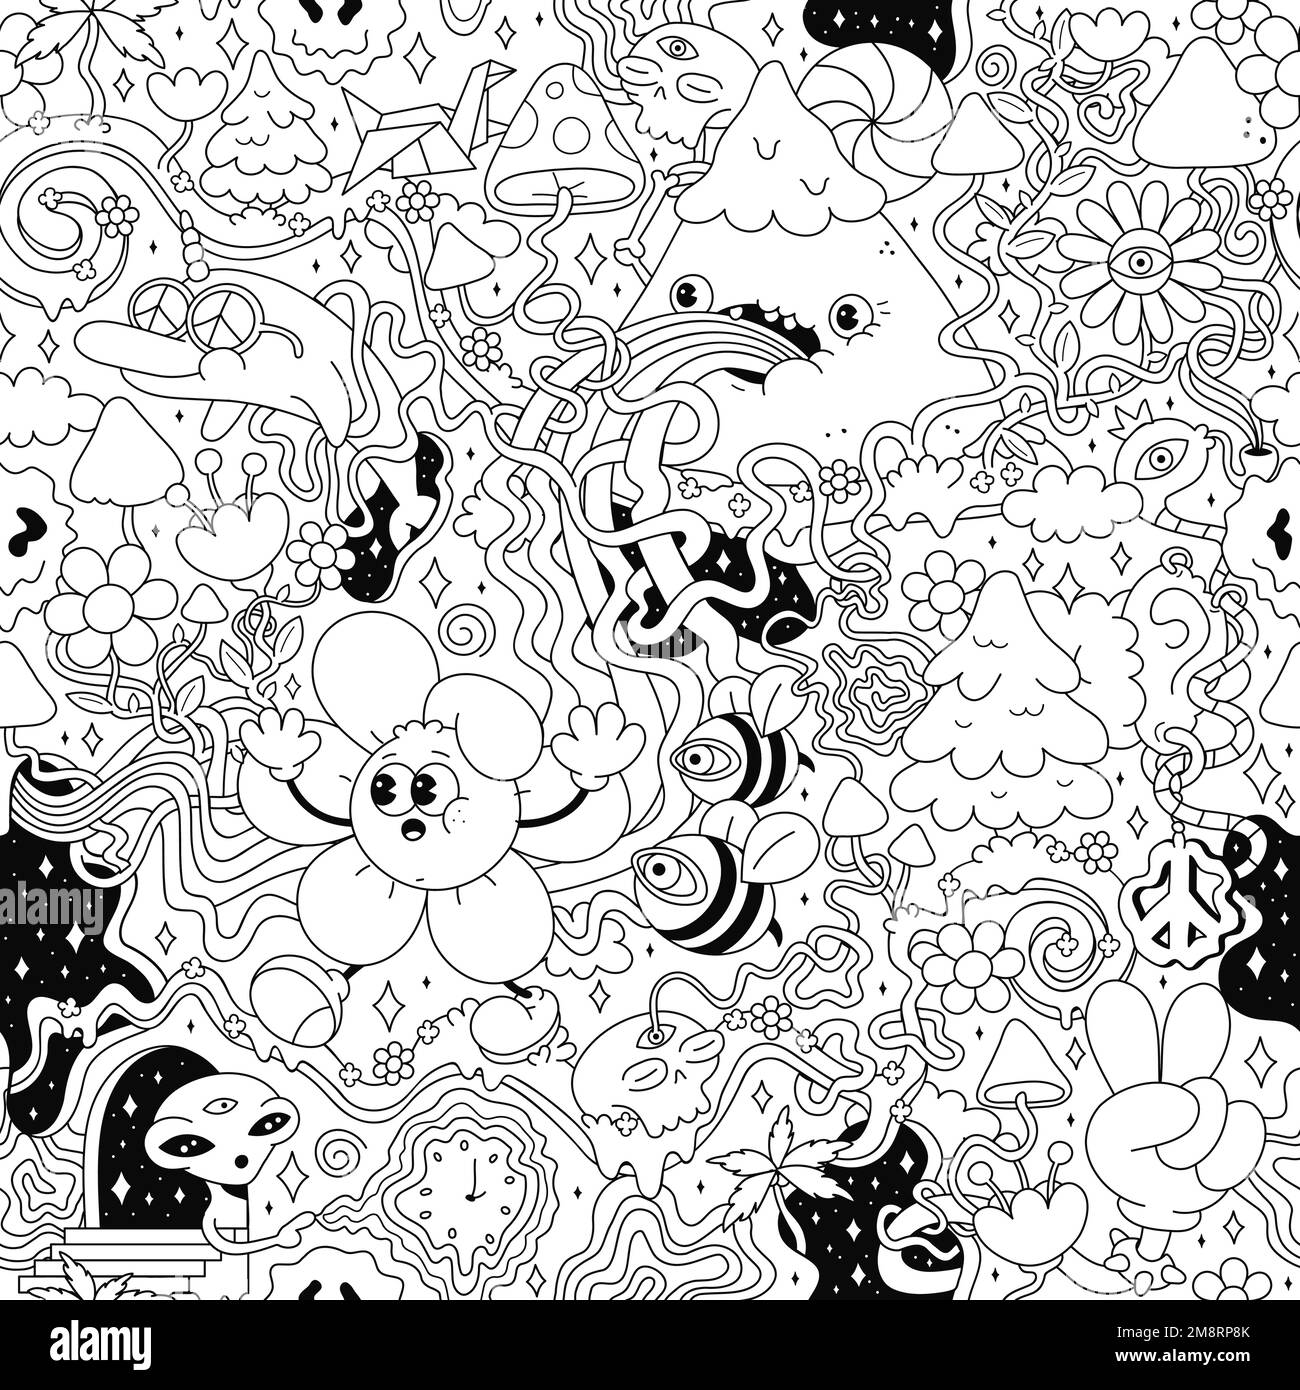 Psychedelic trippy seamless pattern art.Mushroom,magic wizard smoking,melt smile face.Vector cartoon hippie illustration doodle.Trippy 60s,70s,magic mushroom,acid seamless pattern art concept Stock Vector